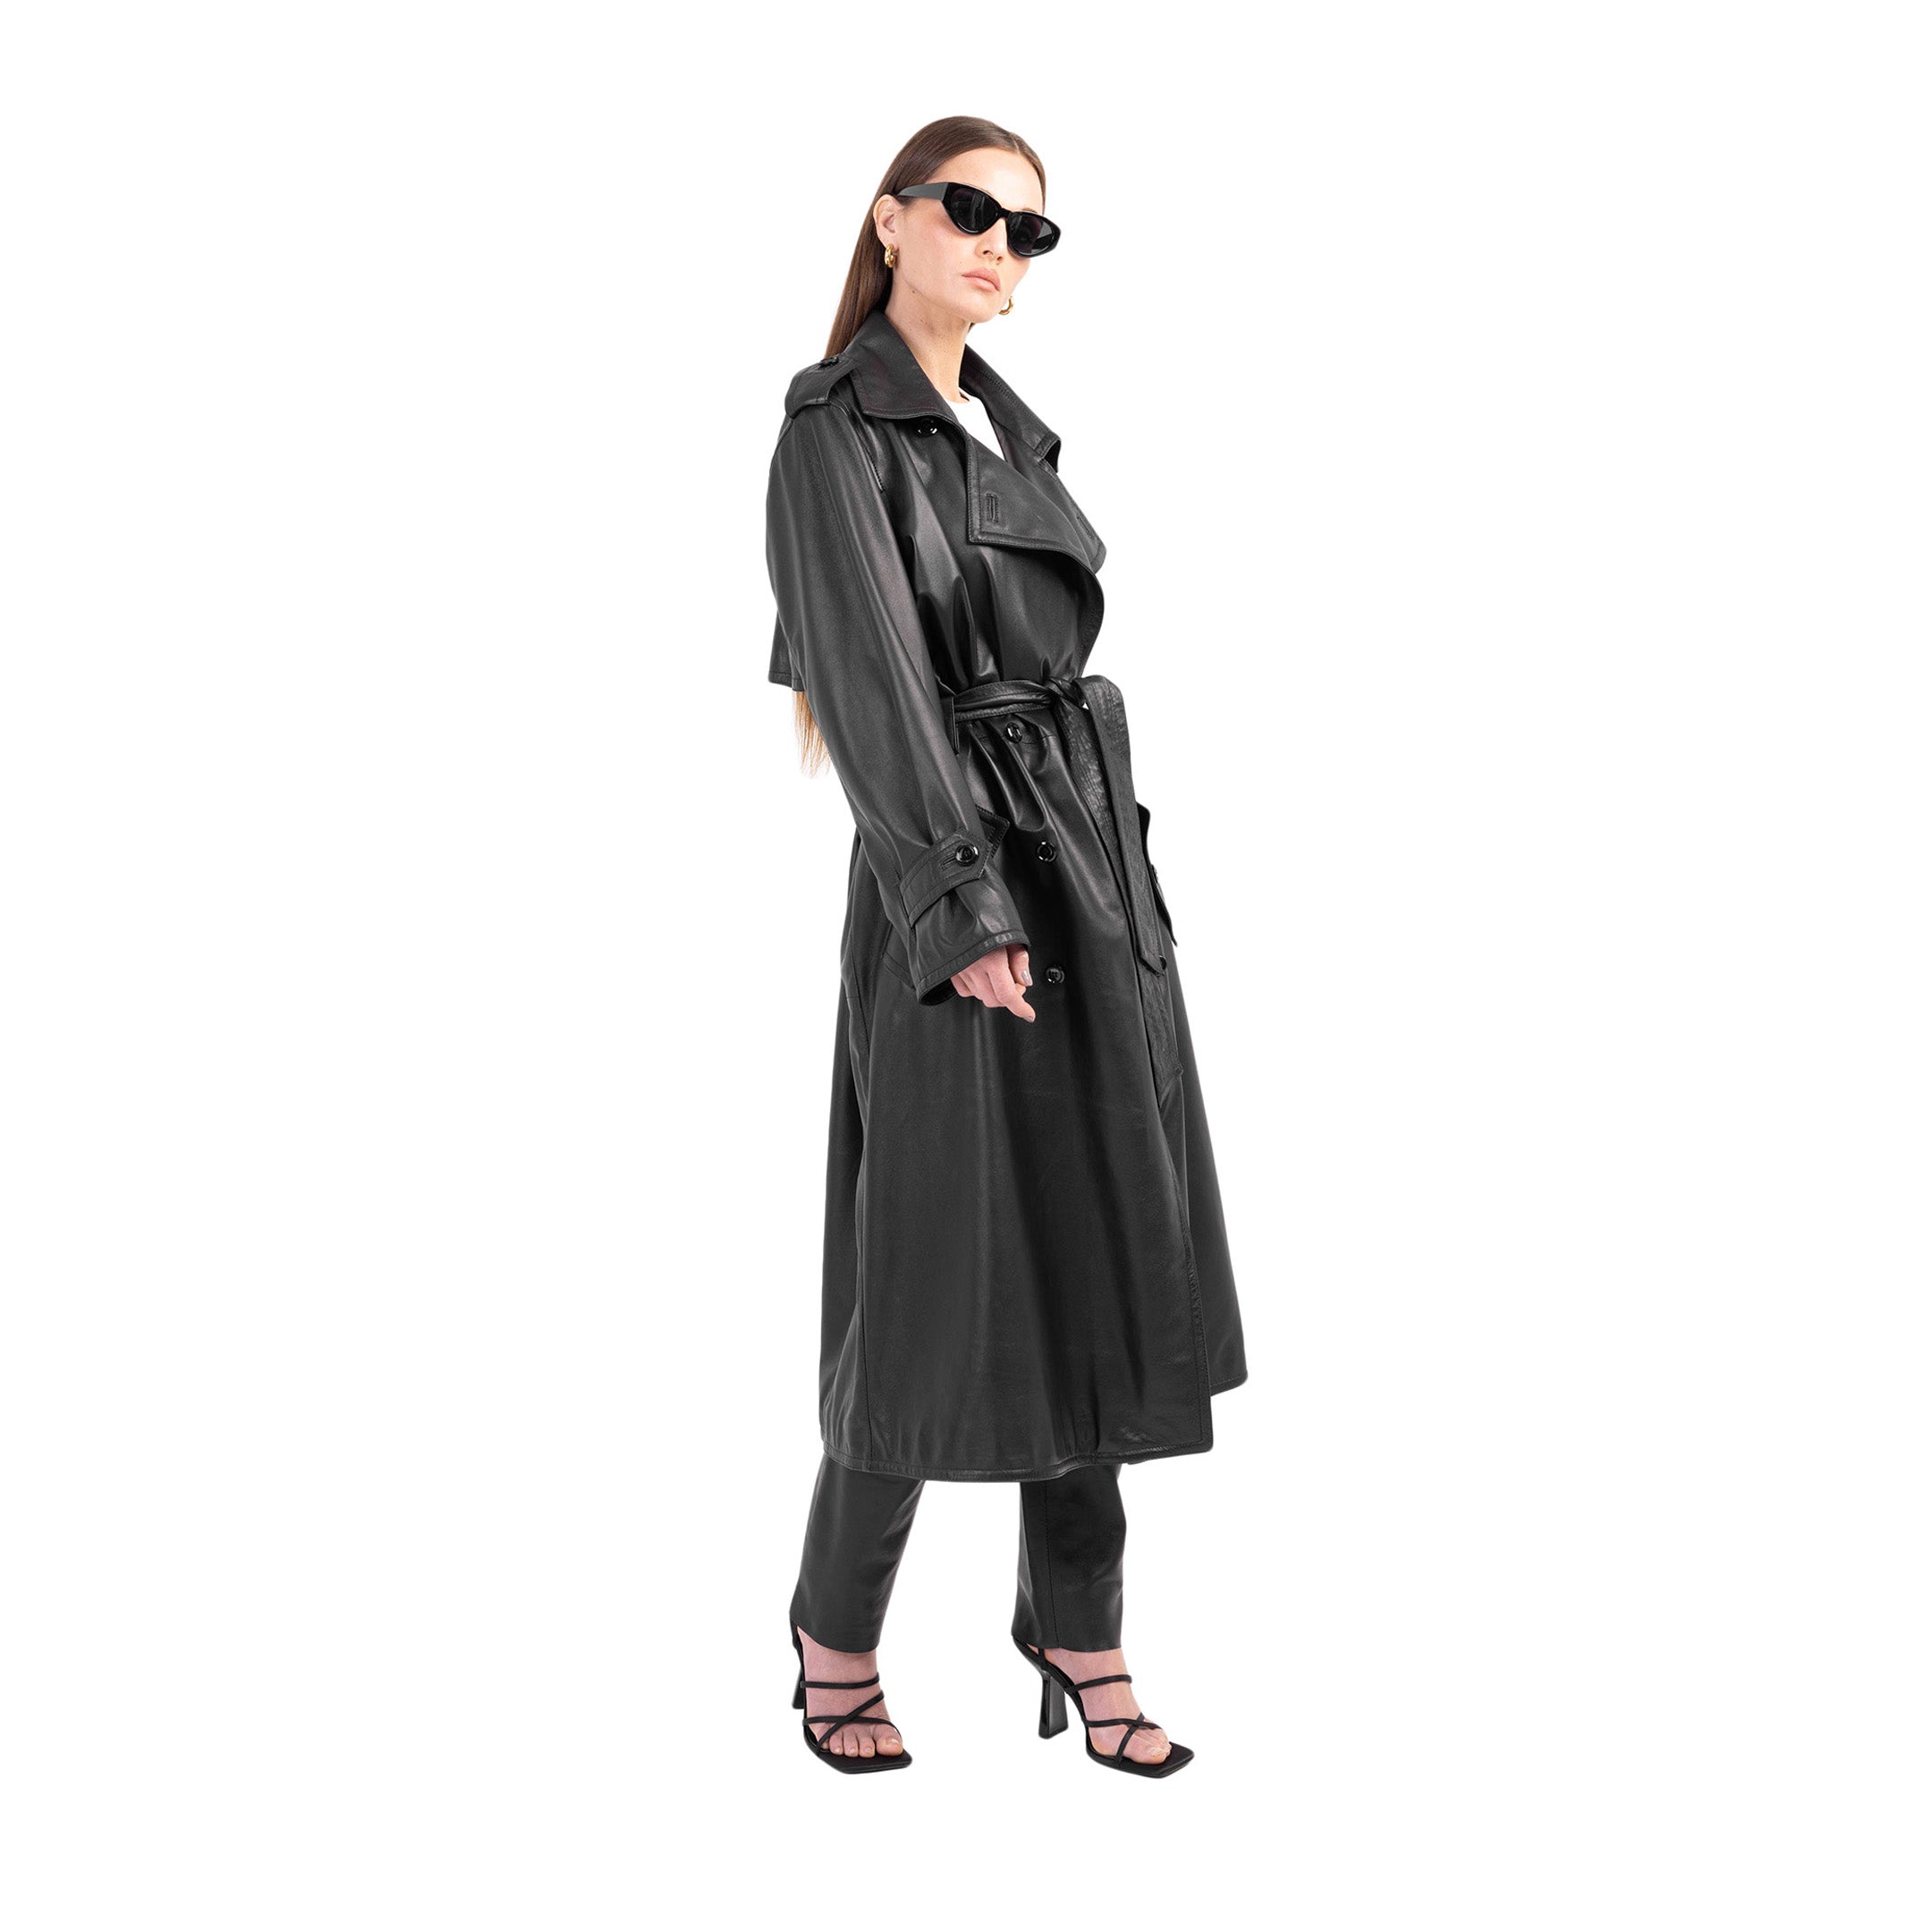 THE LEATHER TRENCH COAT